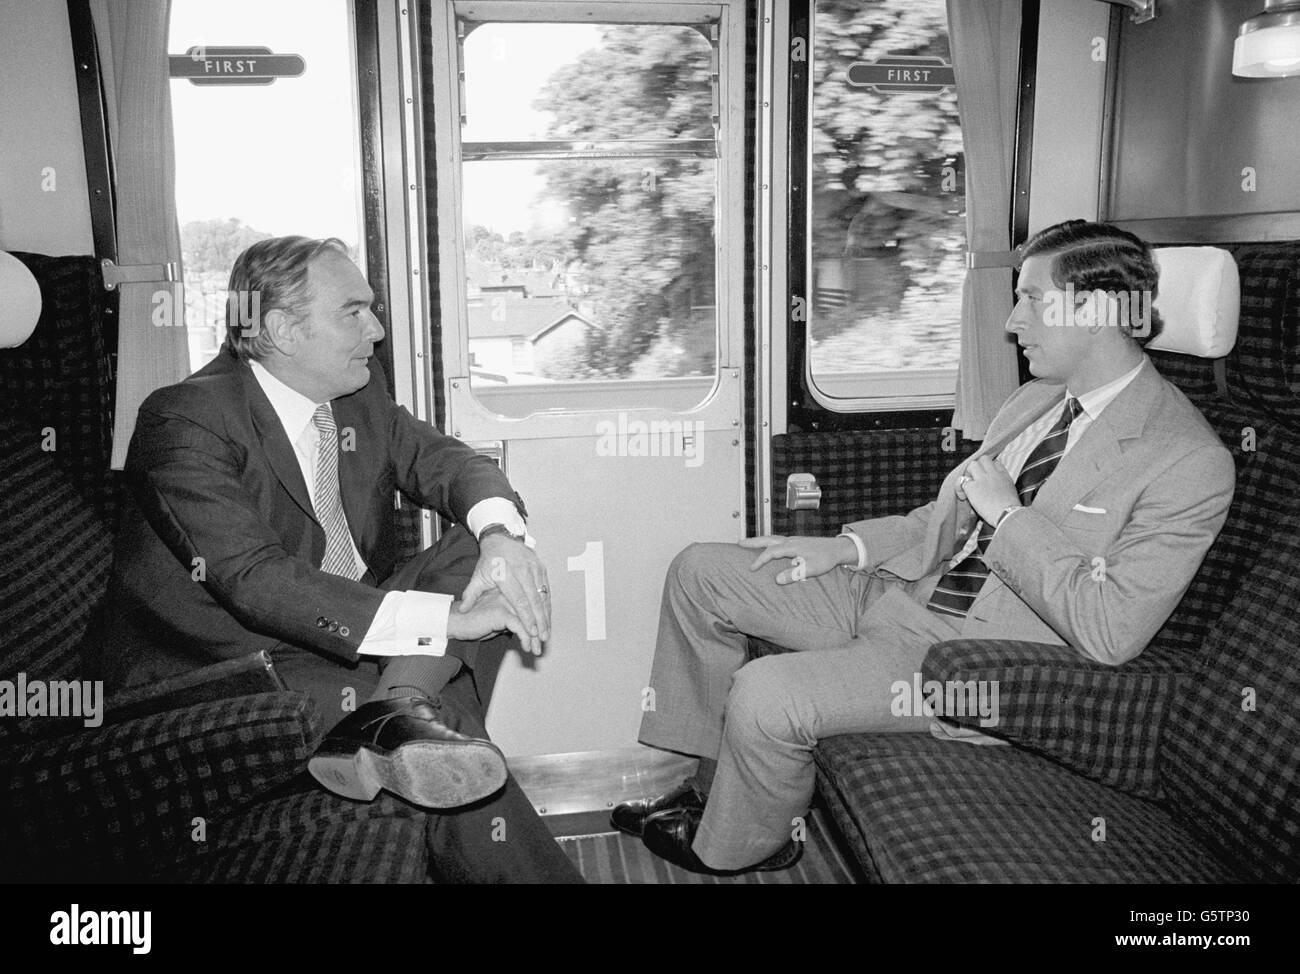 Train compartment Black and White Stock Photos & Images - Alamy